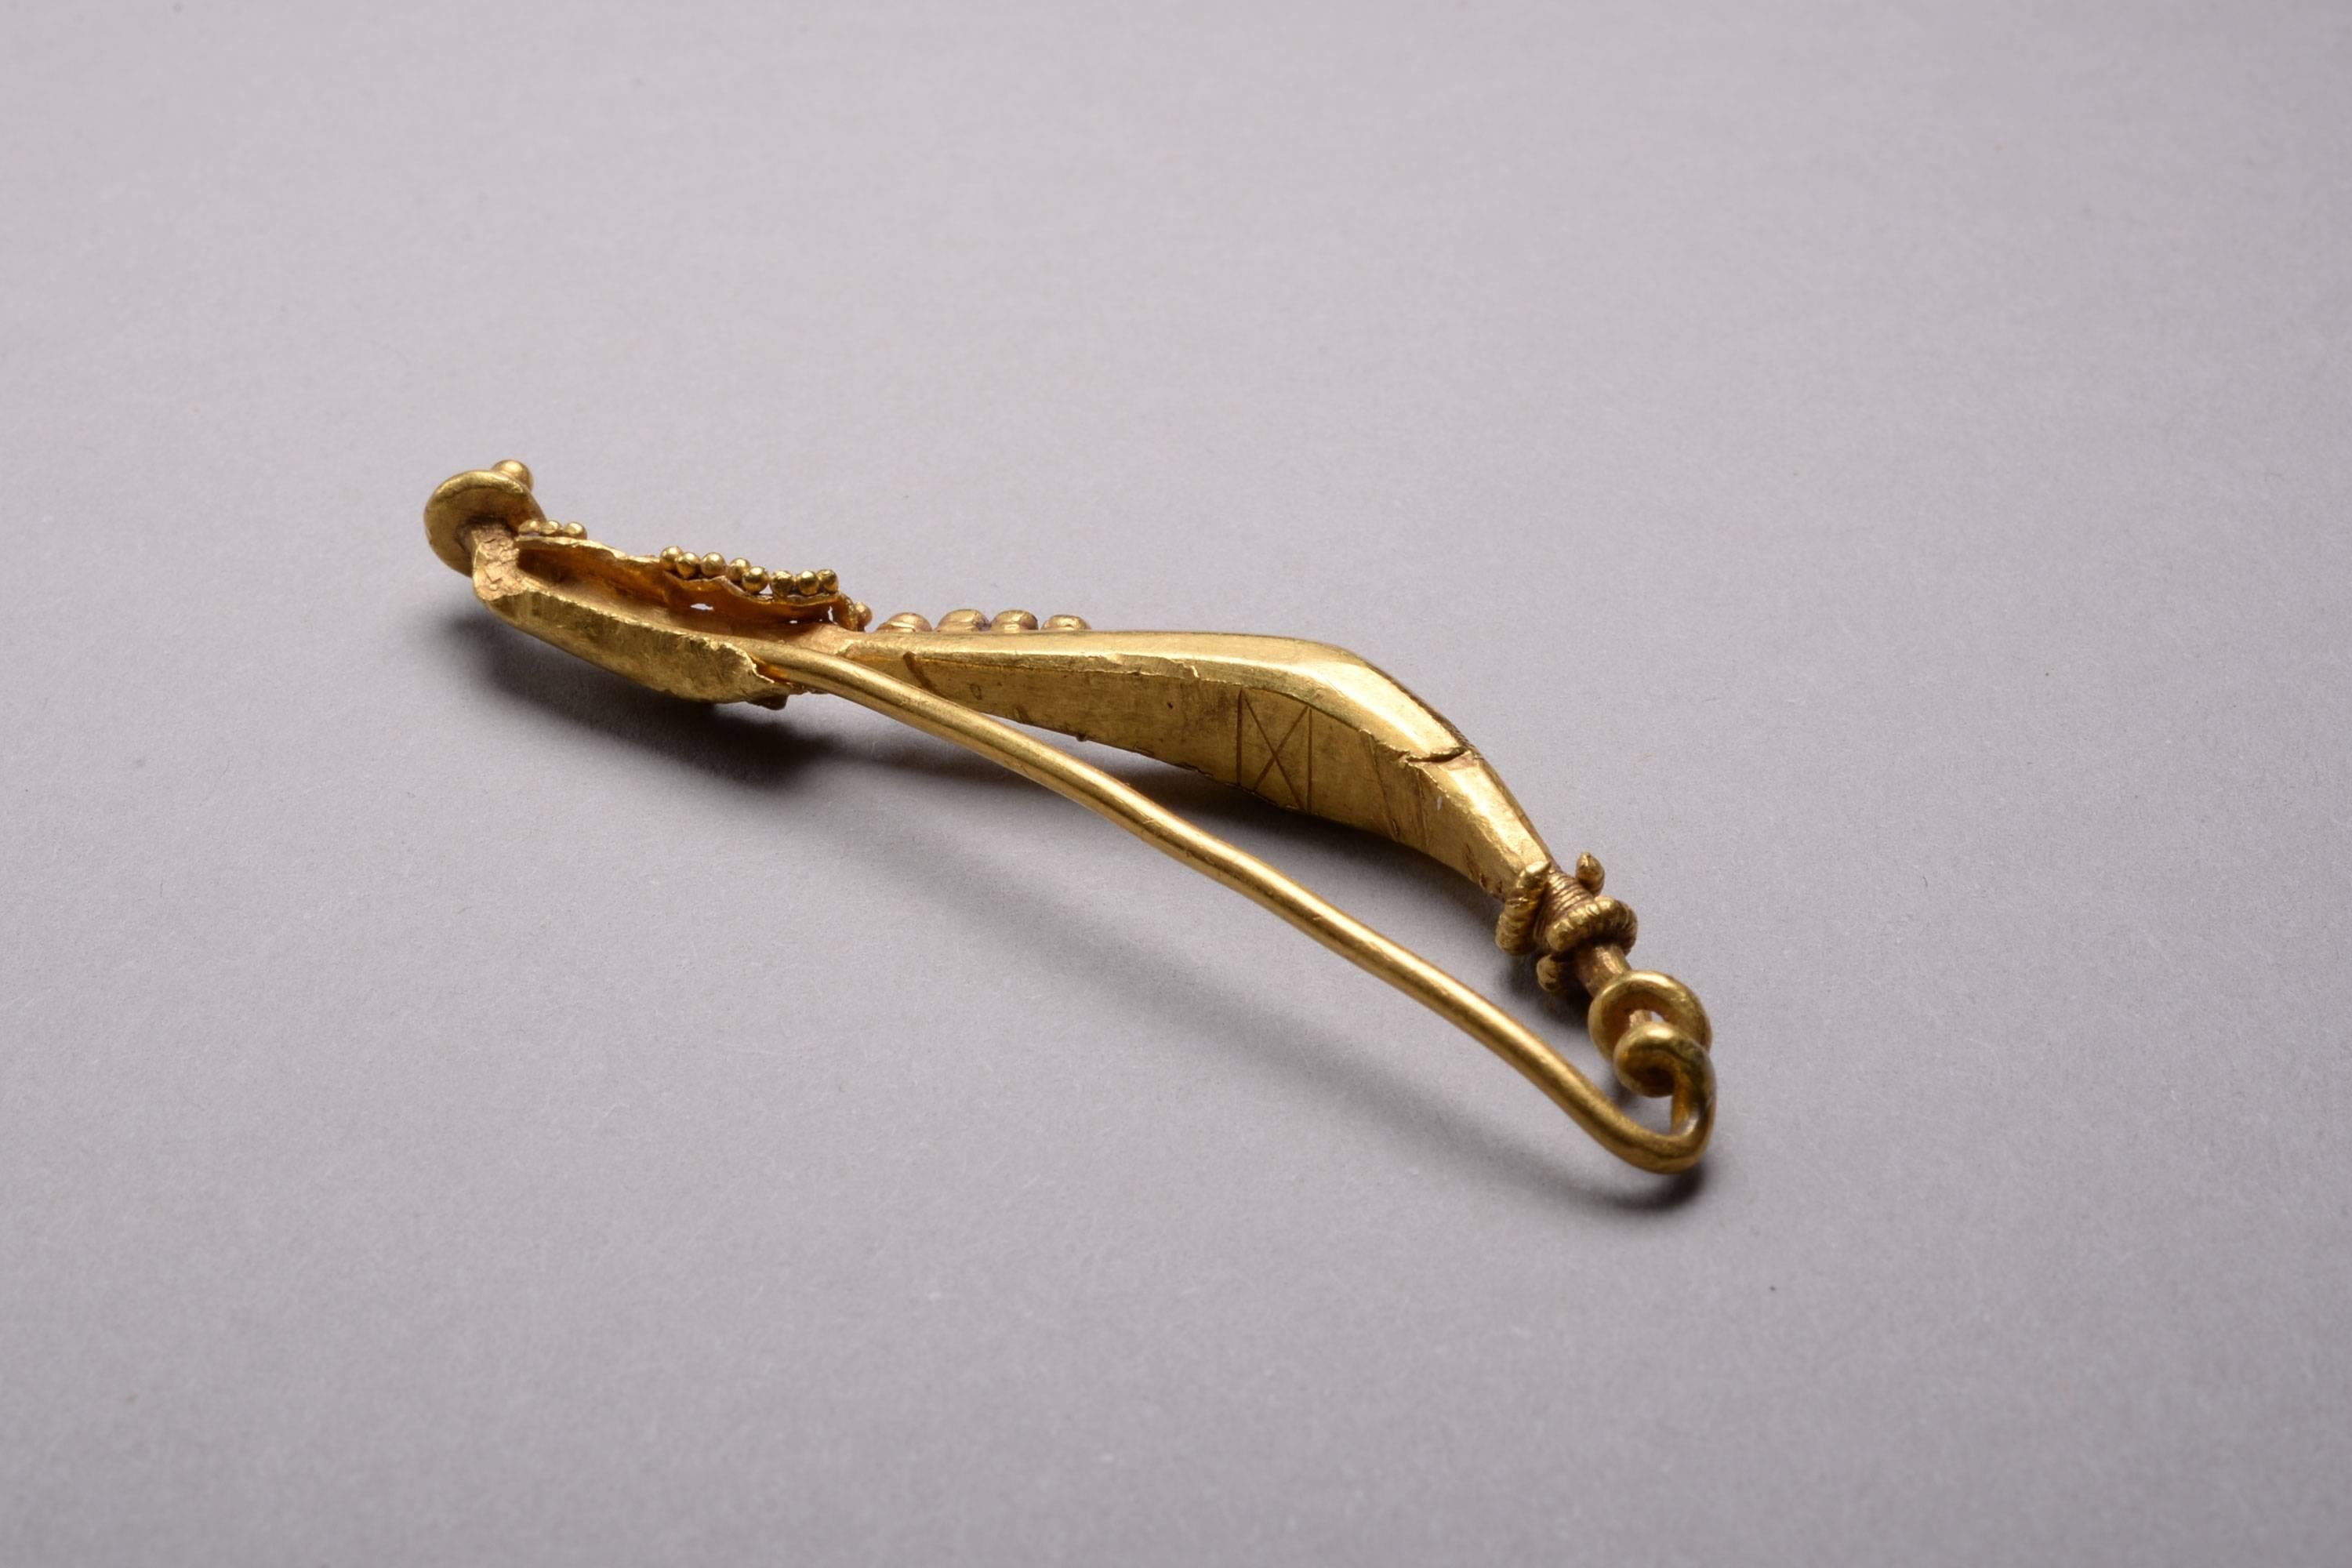 A stunning and elegant ancient Romano-Celtic solid gold brooch, dating to around 50 BC - 10 AD. The shape of this fibula is extremely rare, and this is an honest, genuine example in a market plagued by forgeries.

This striking brooch has a